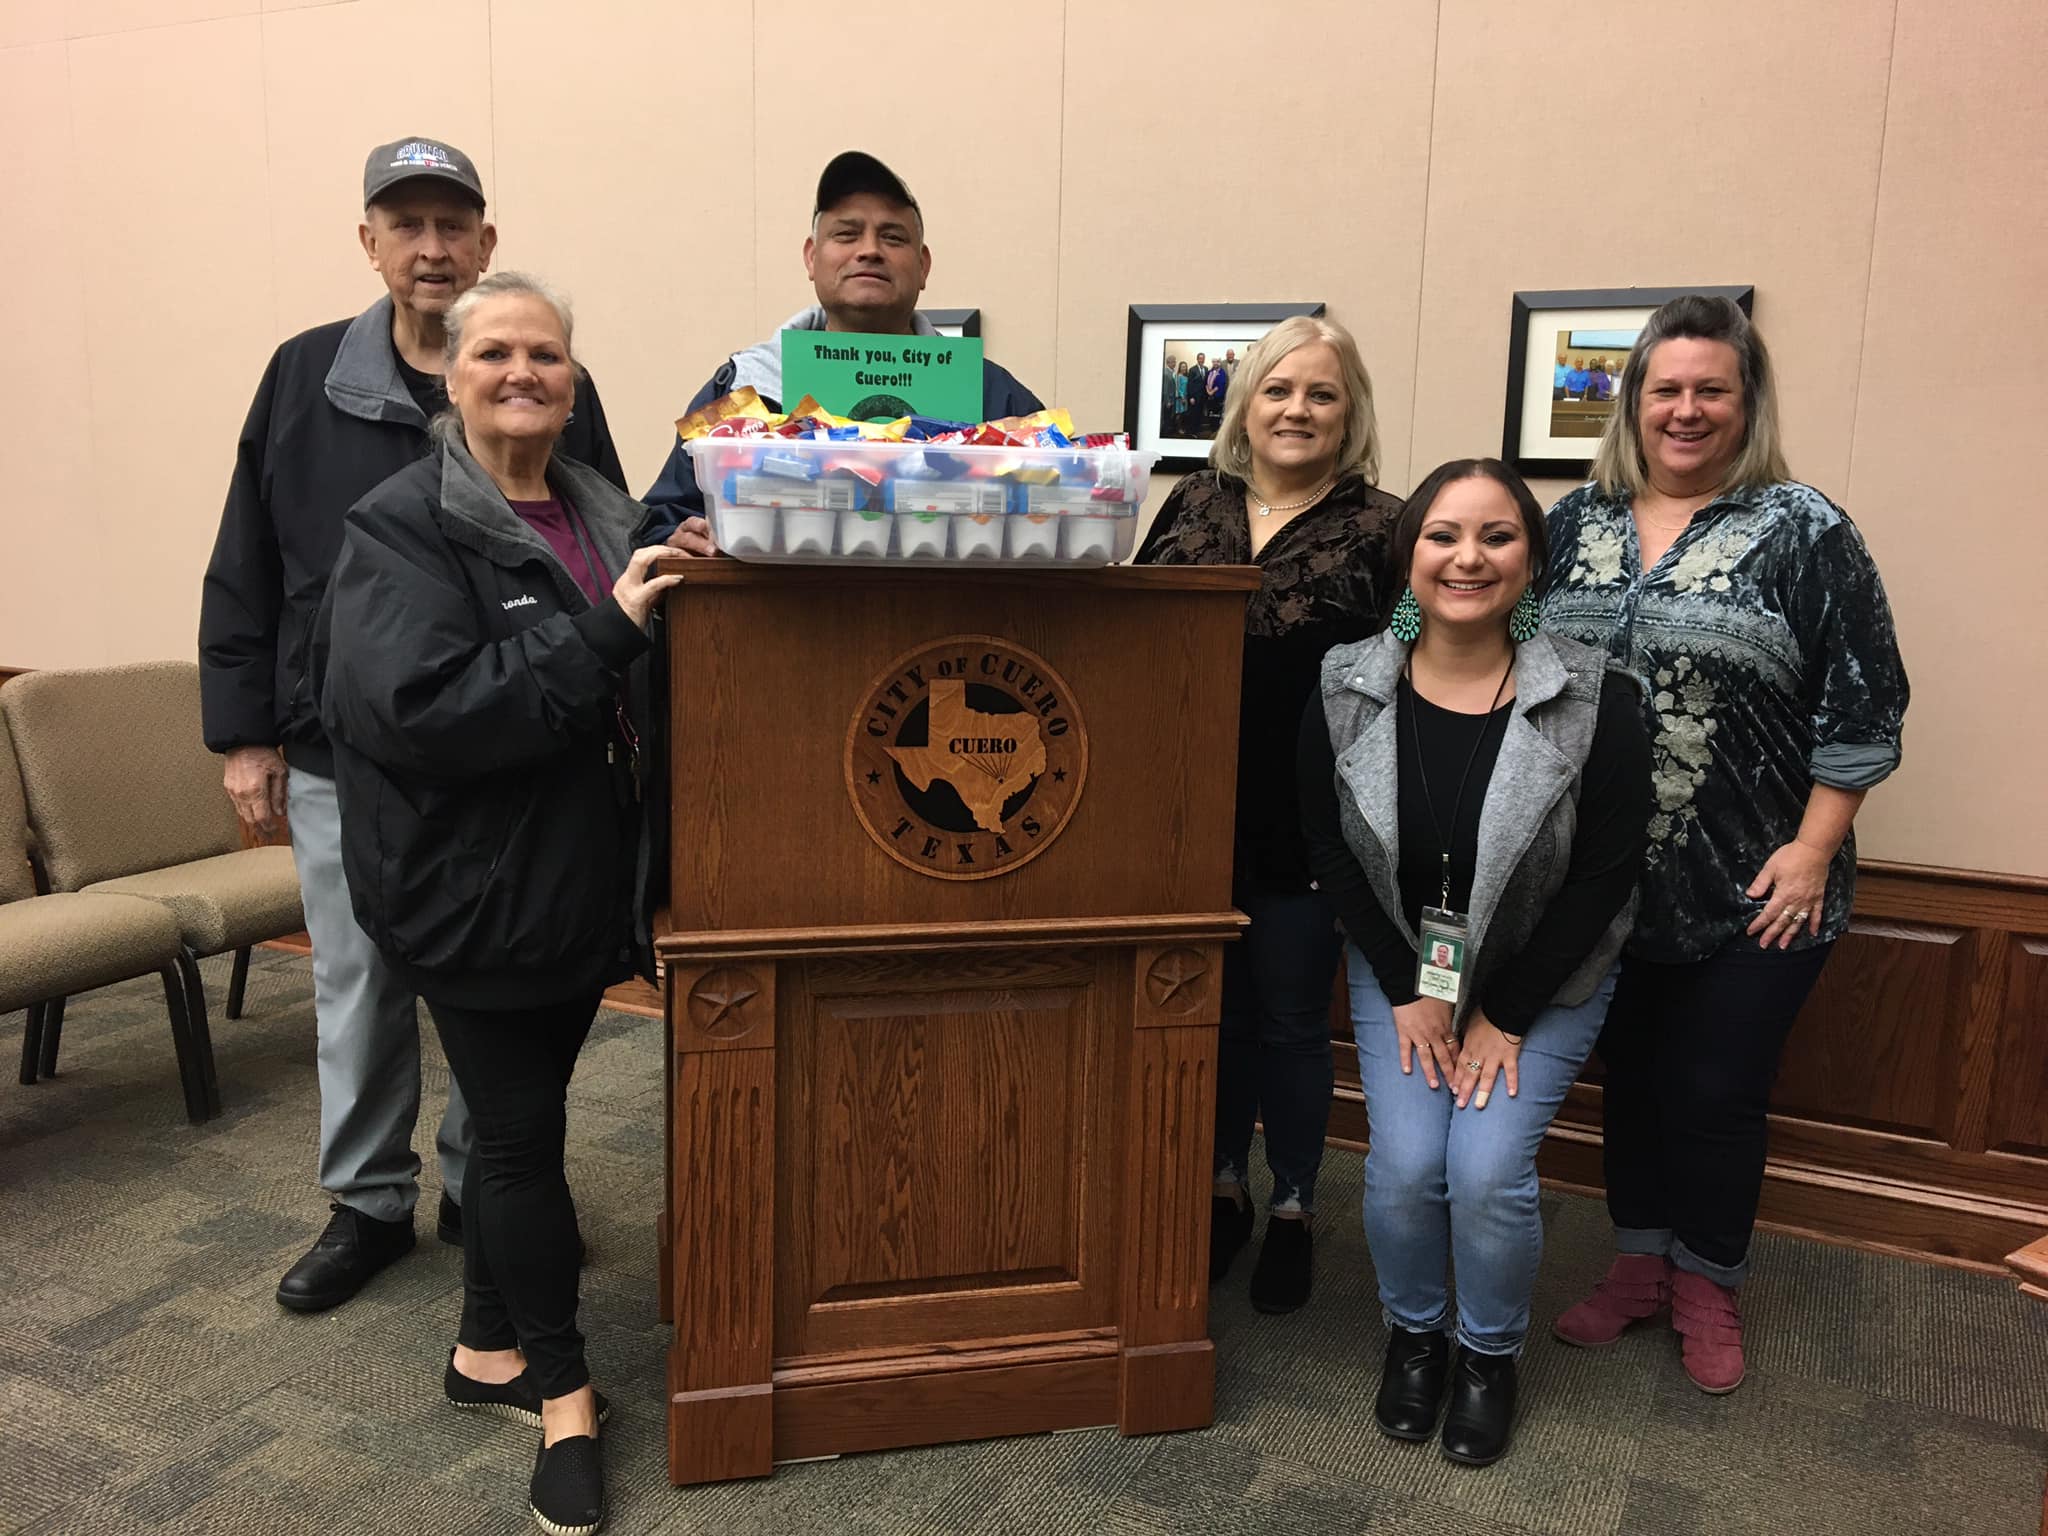 December Events Committee presents “thank you” snack care package to Cuero City Government